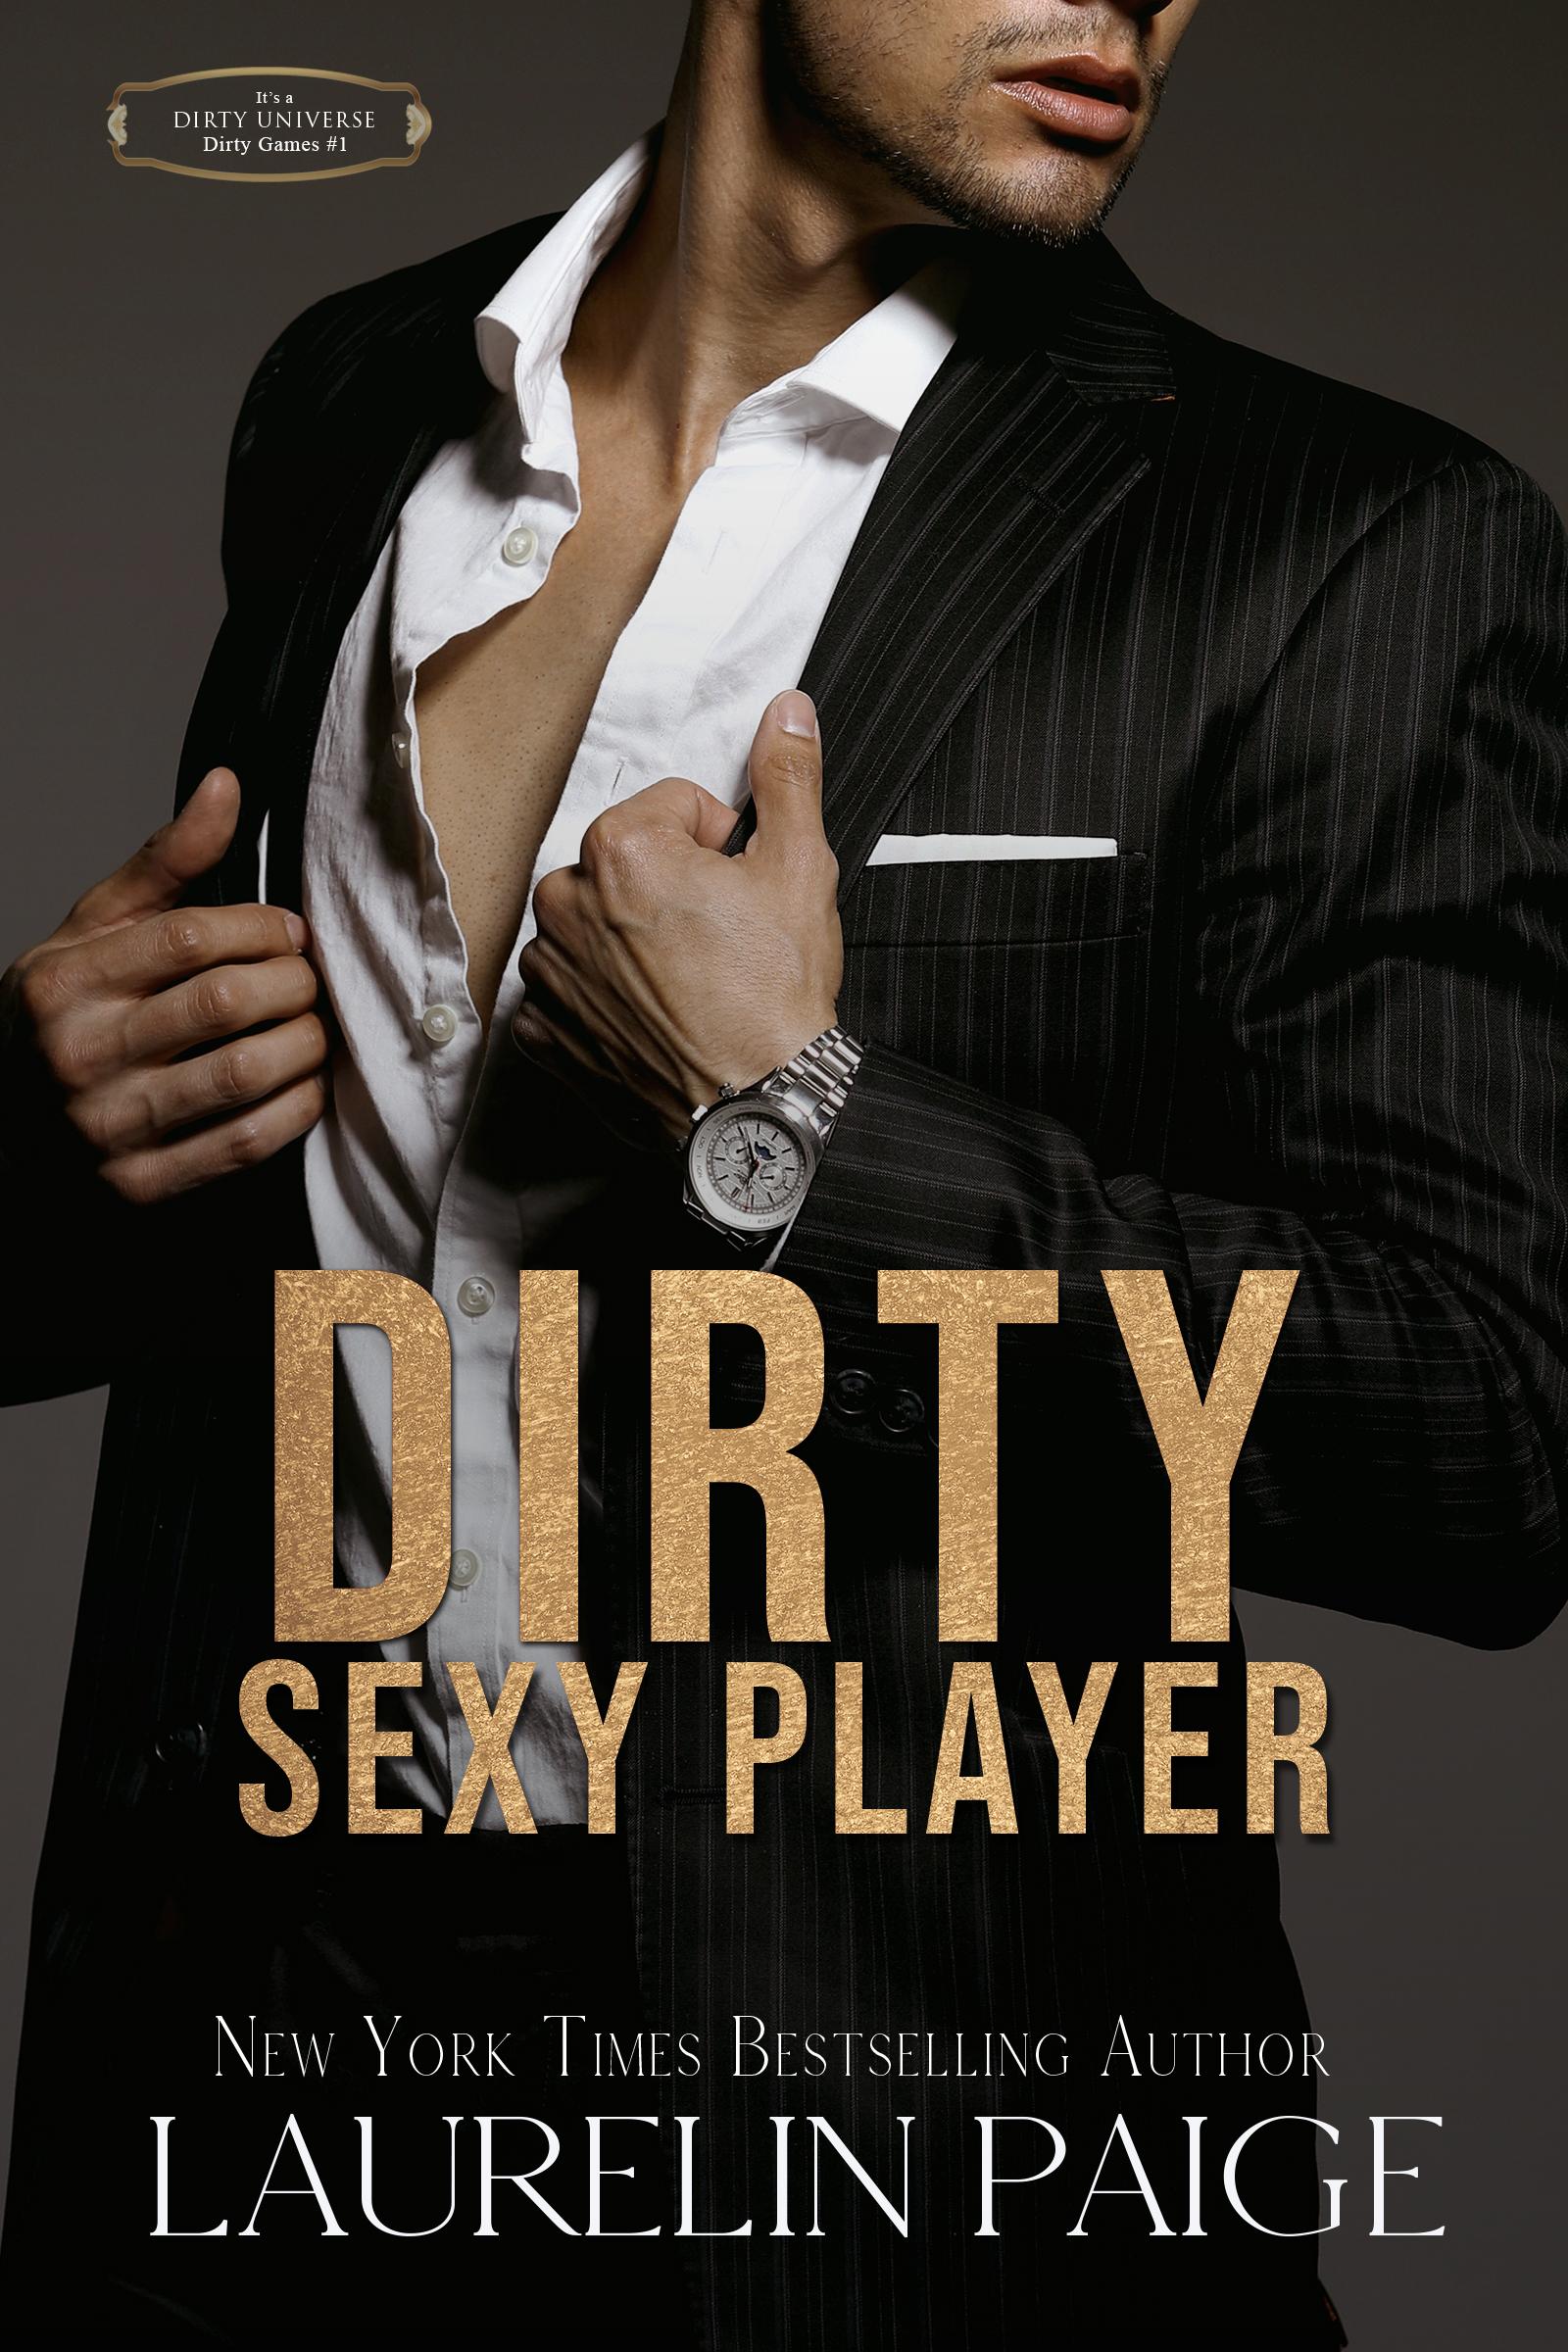 Dirty Sexy Player